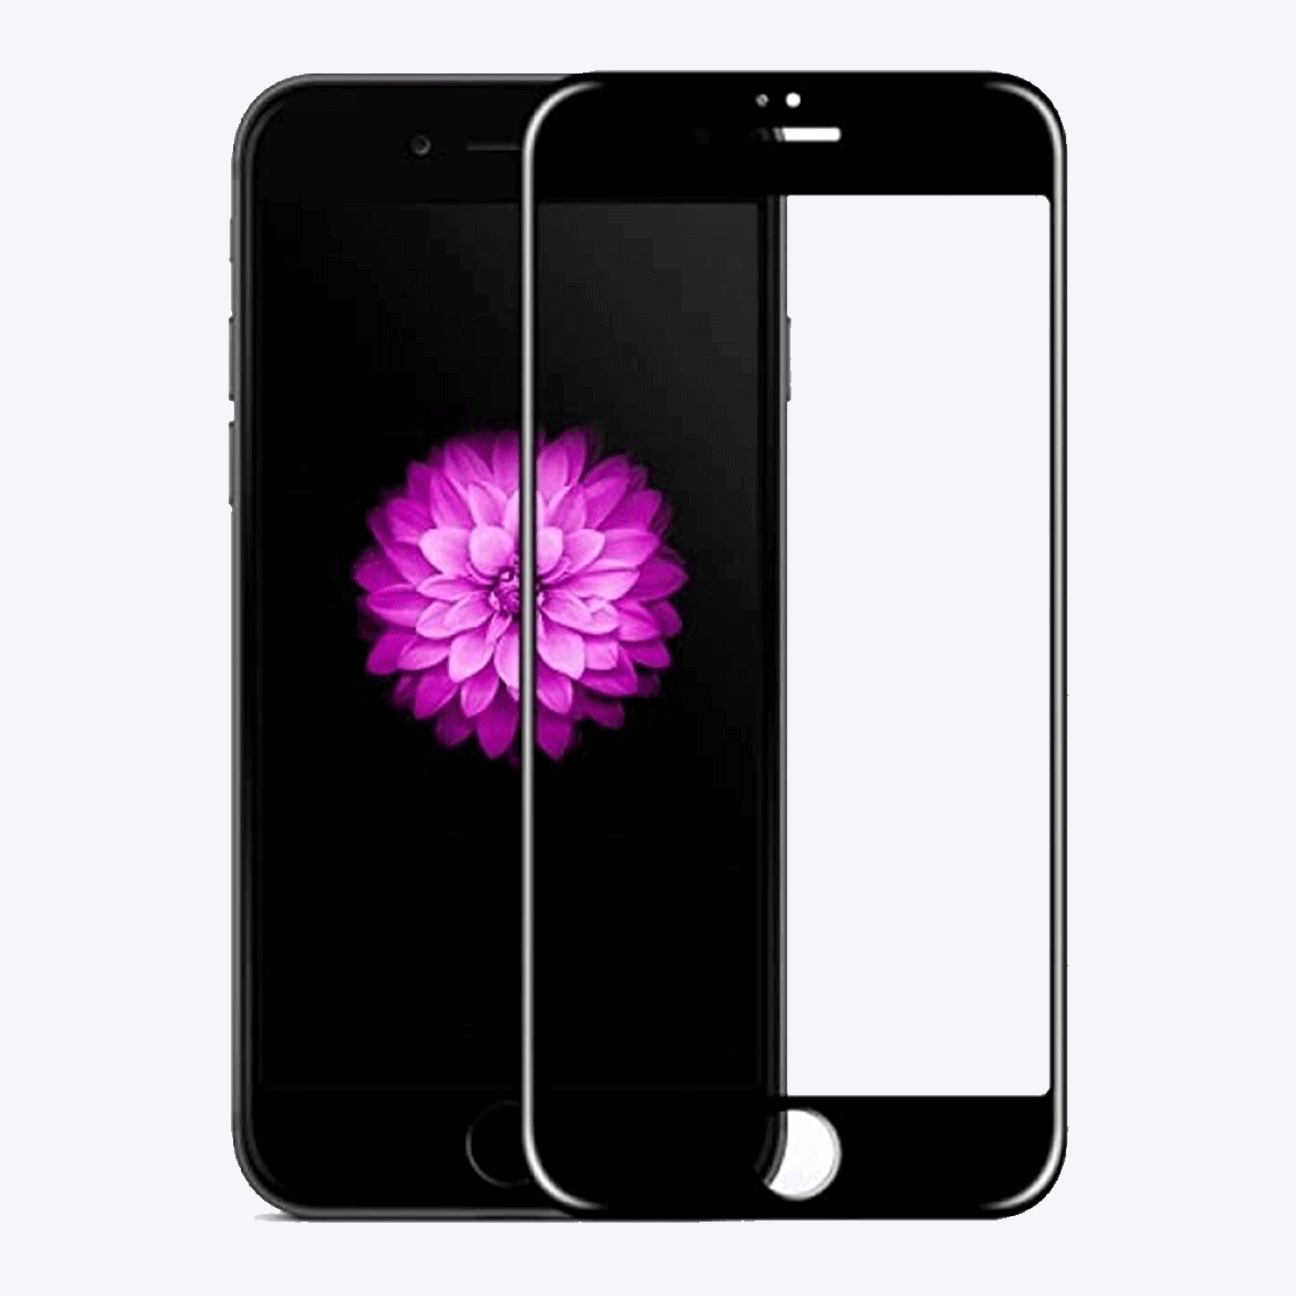 iPhone 6 Plus 11D Mobile Glass